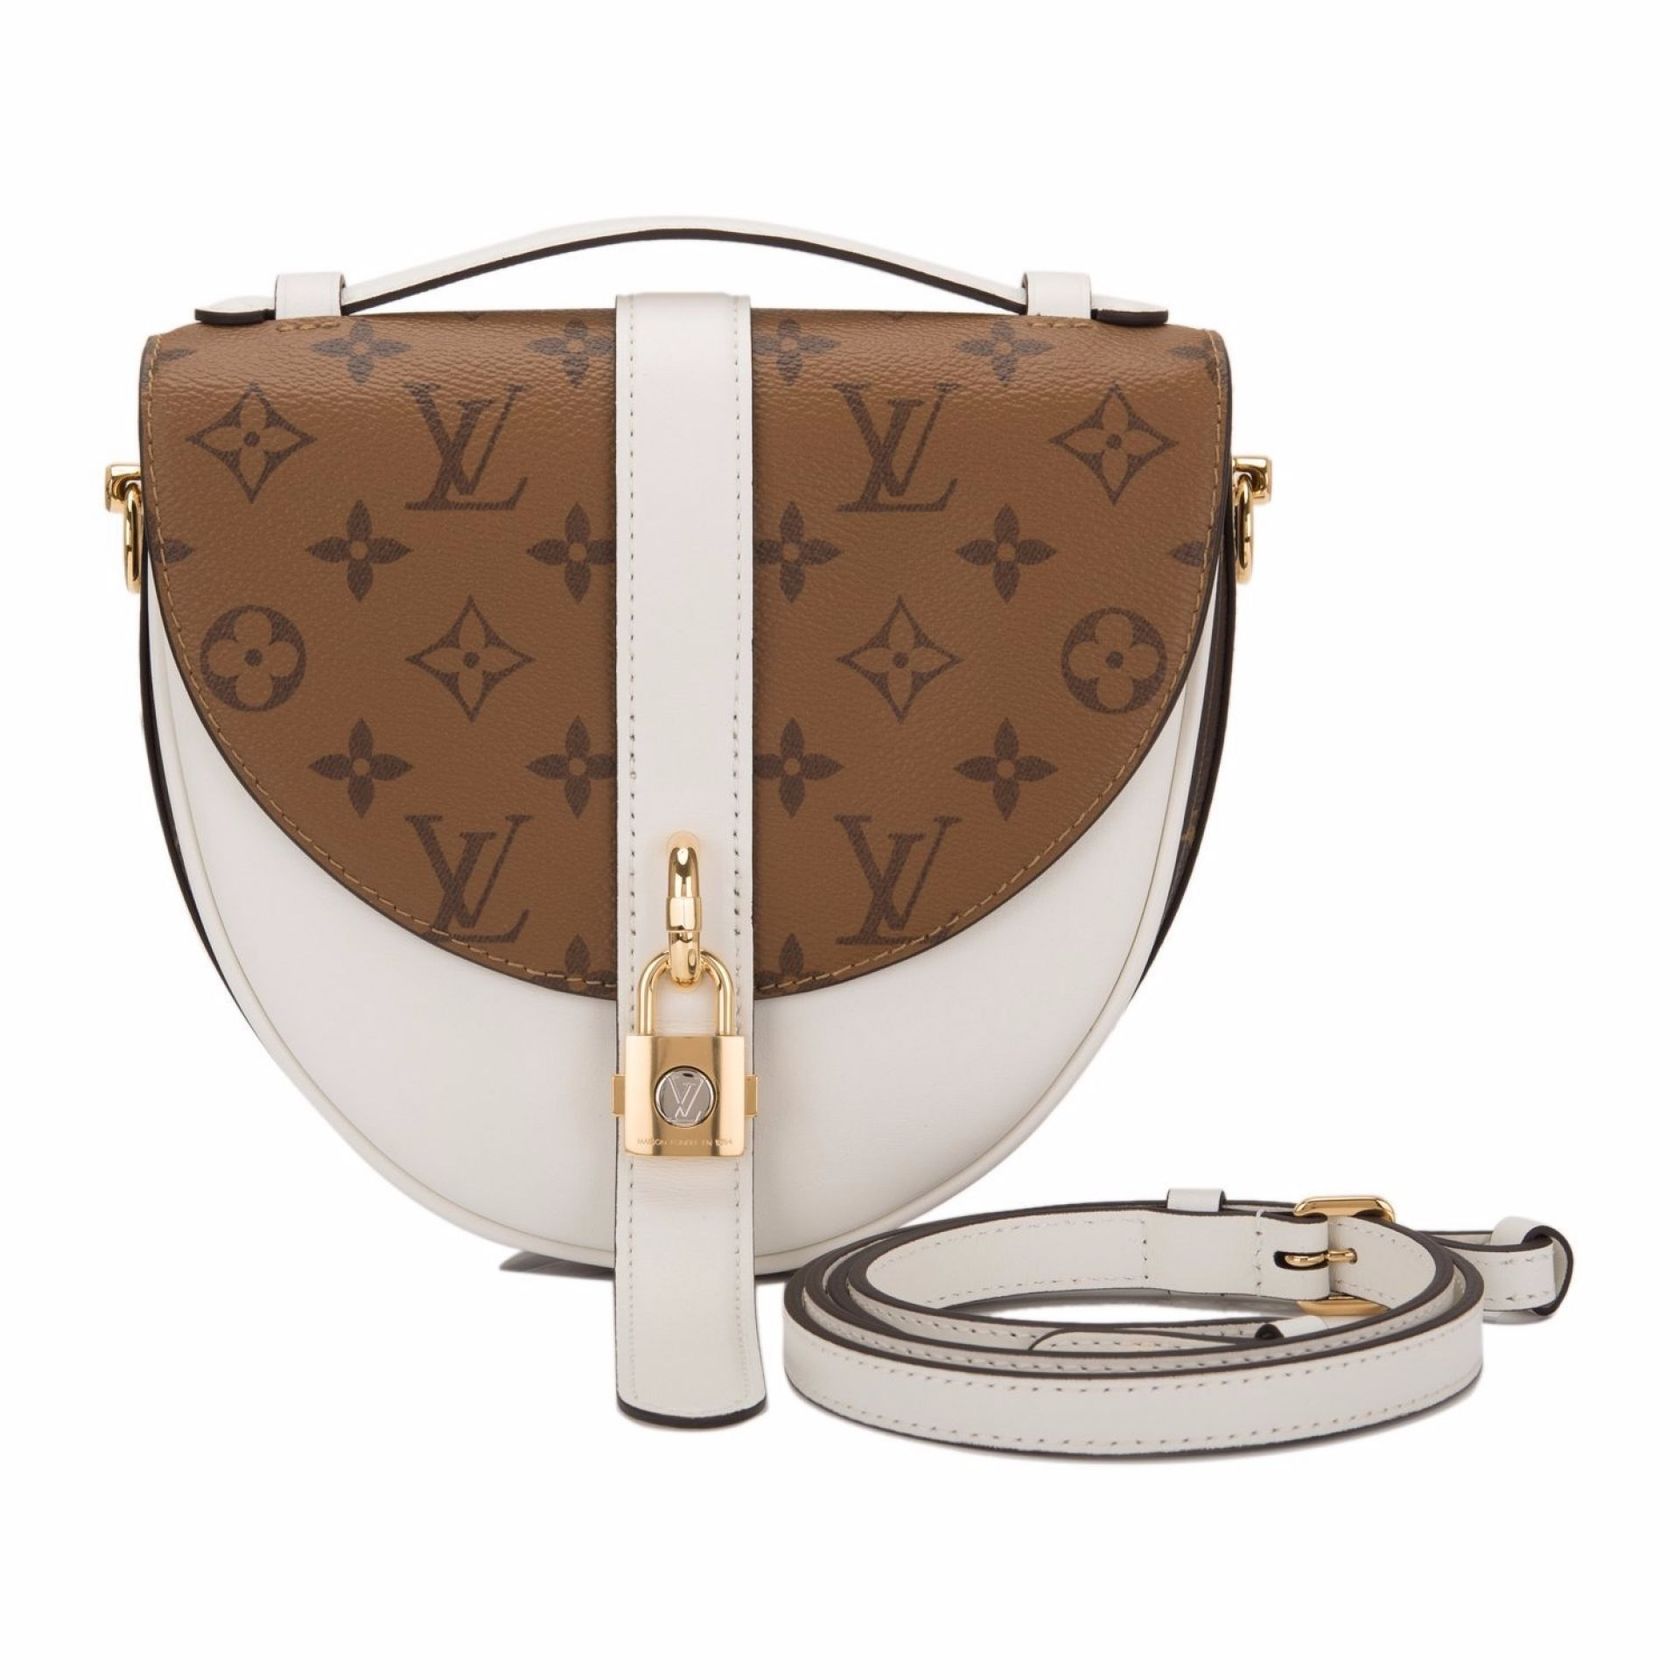 Louis Vuitton Padlock For Sale | Confederated Tribes of the Umatilla Indian Reservation